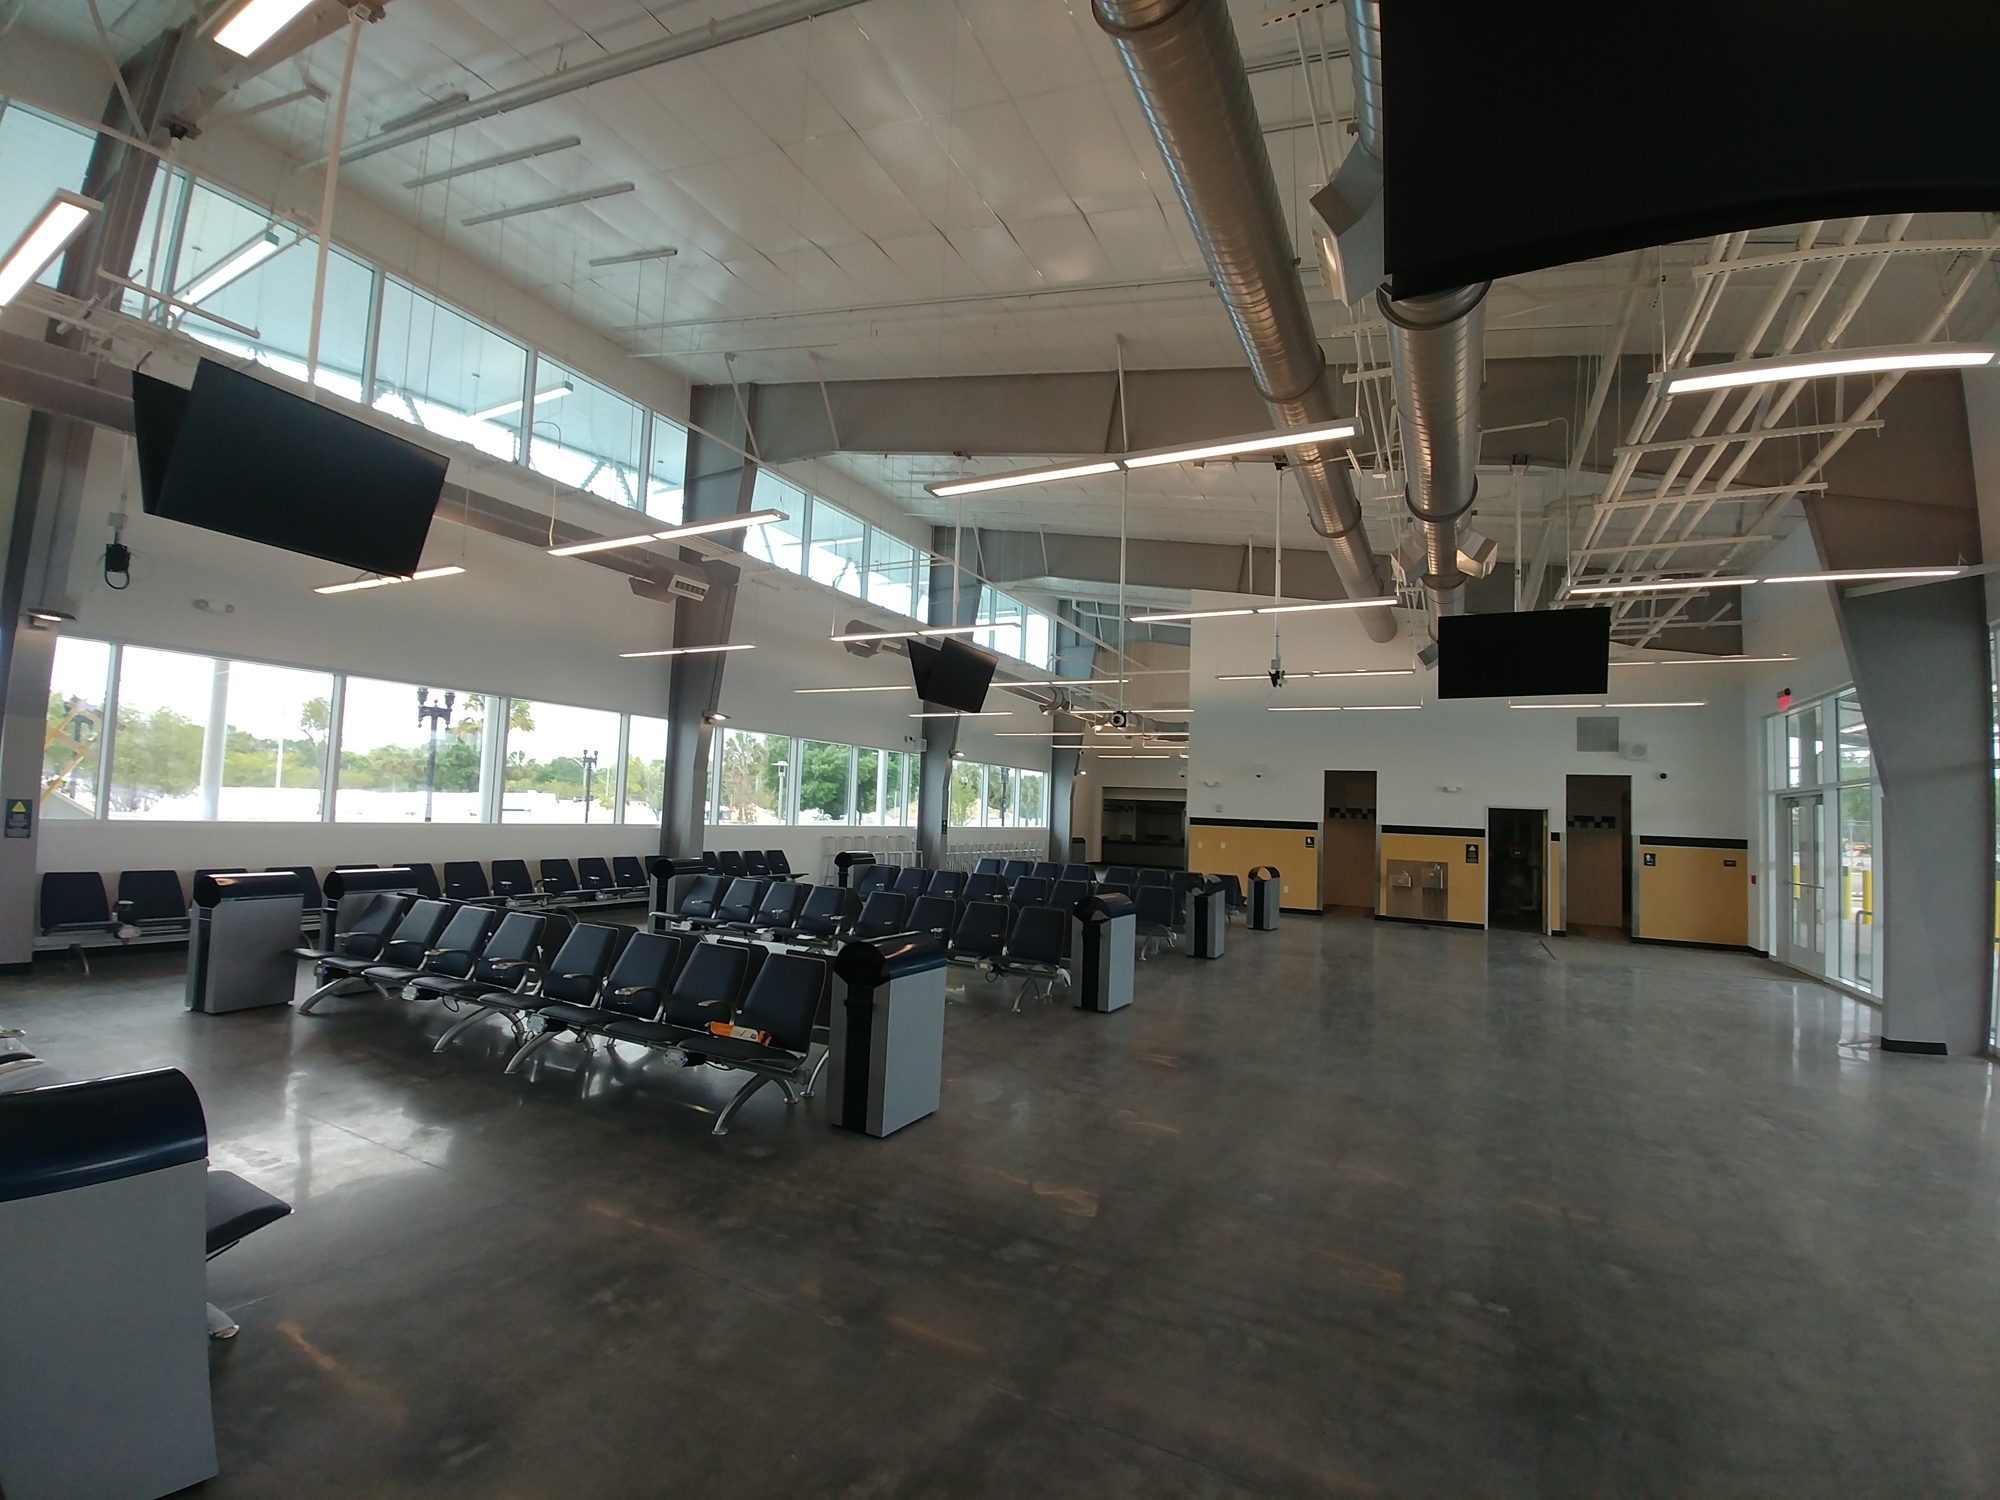 The waiting area of the new Greyhound bus terminal features an open floor plan. 